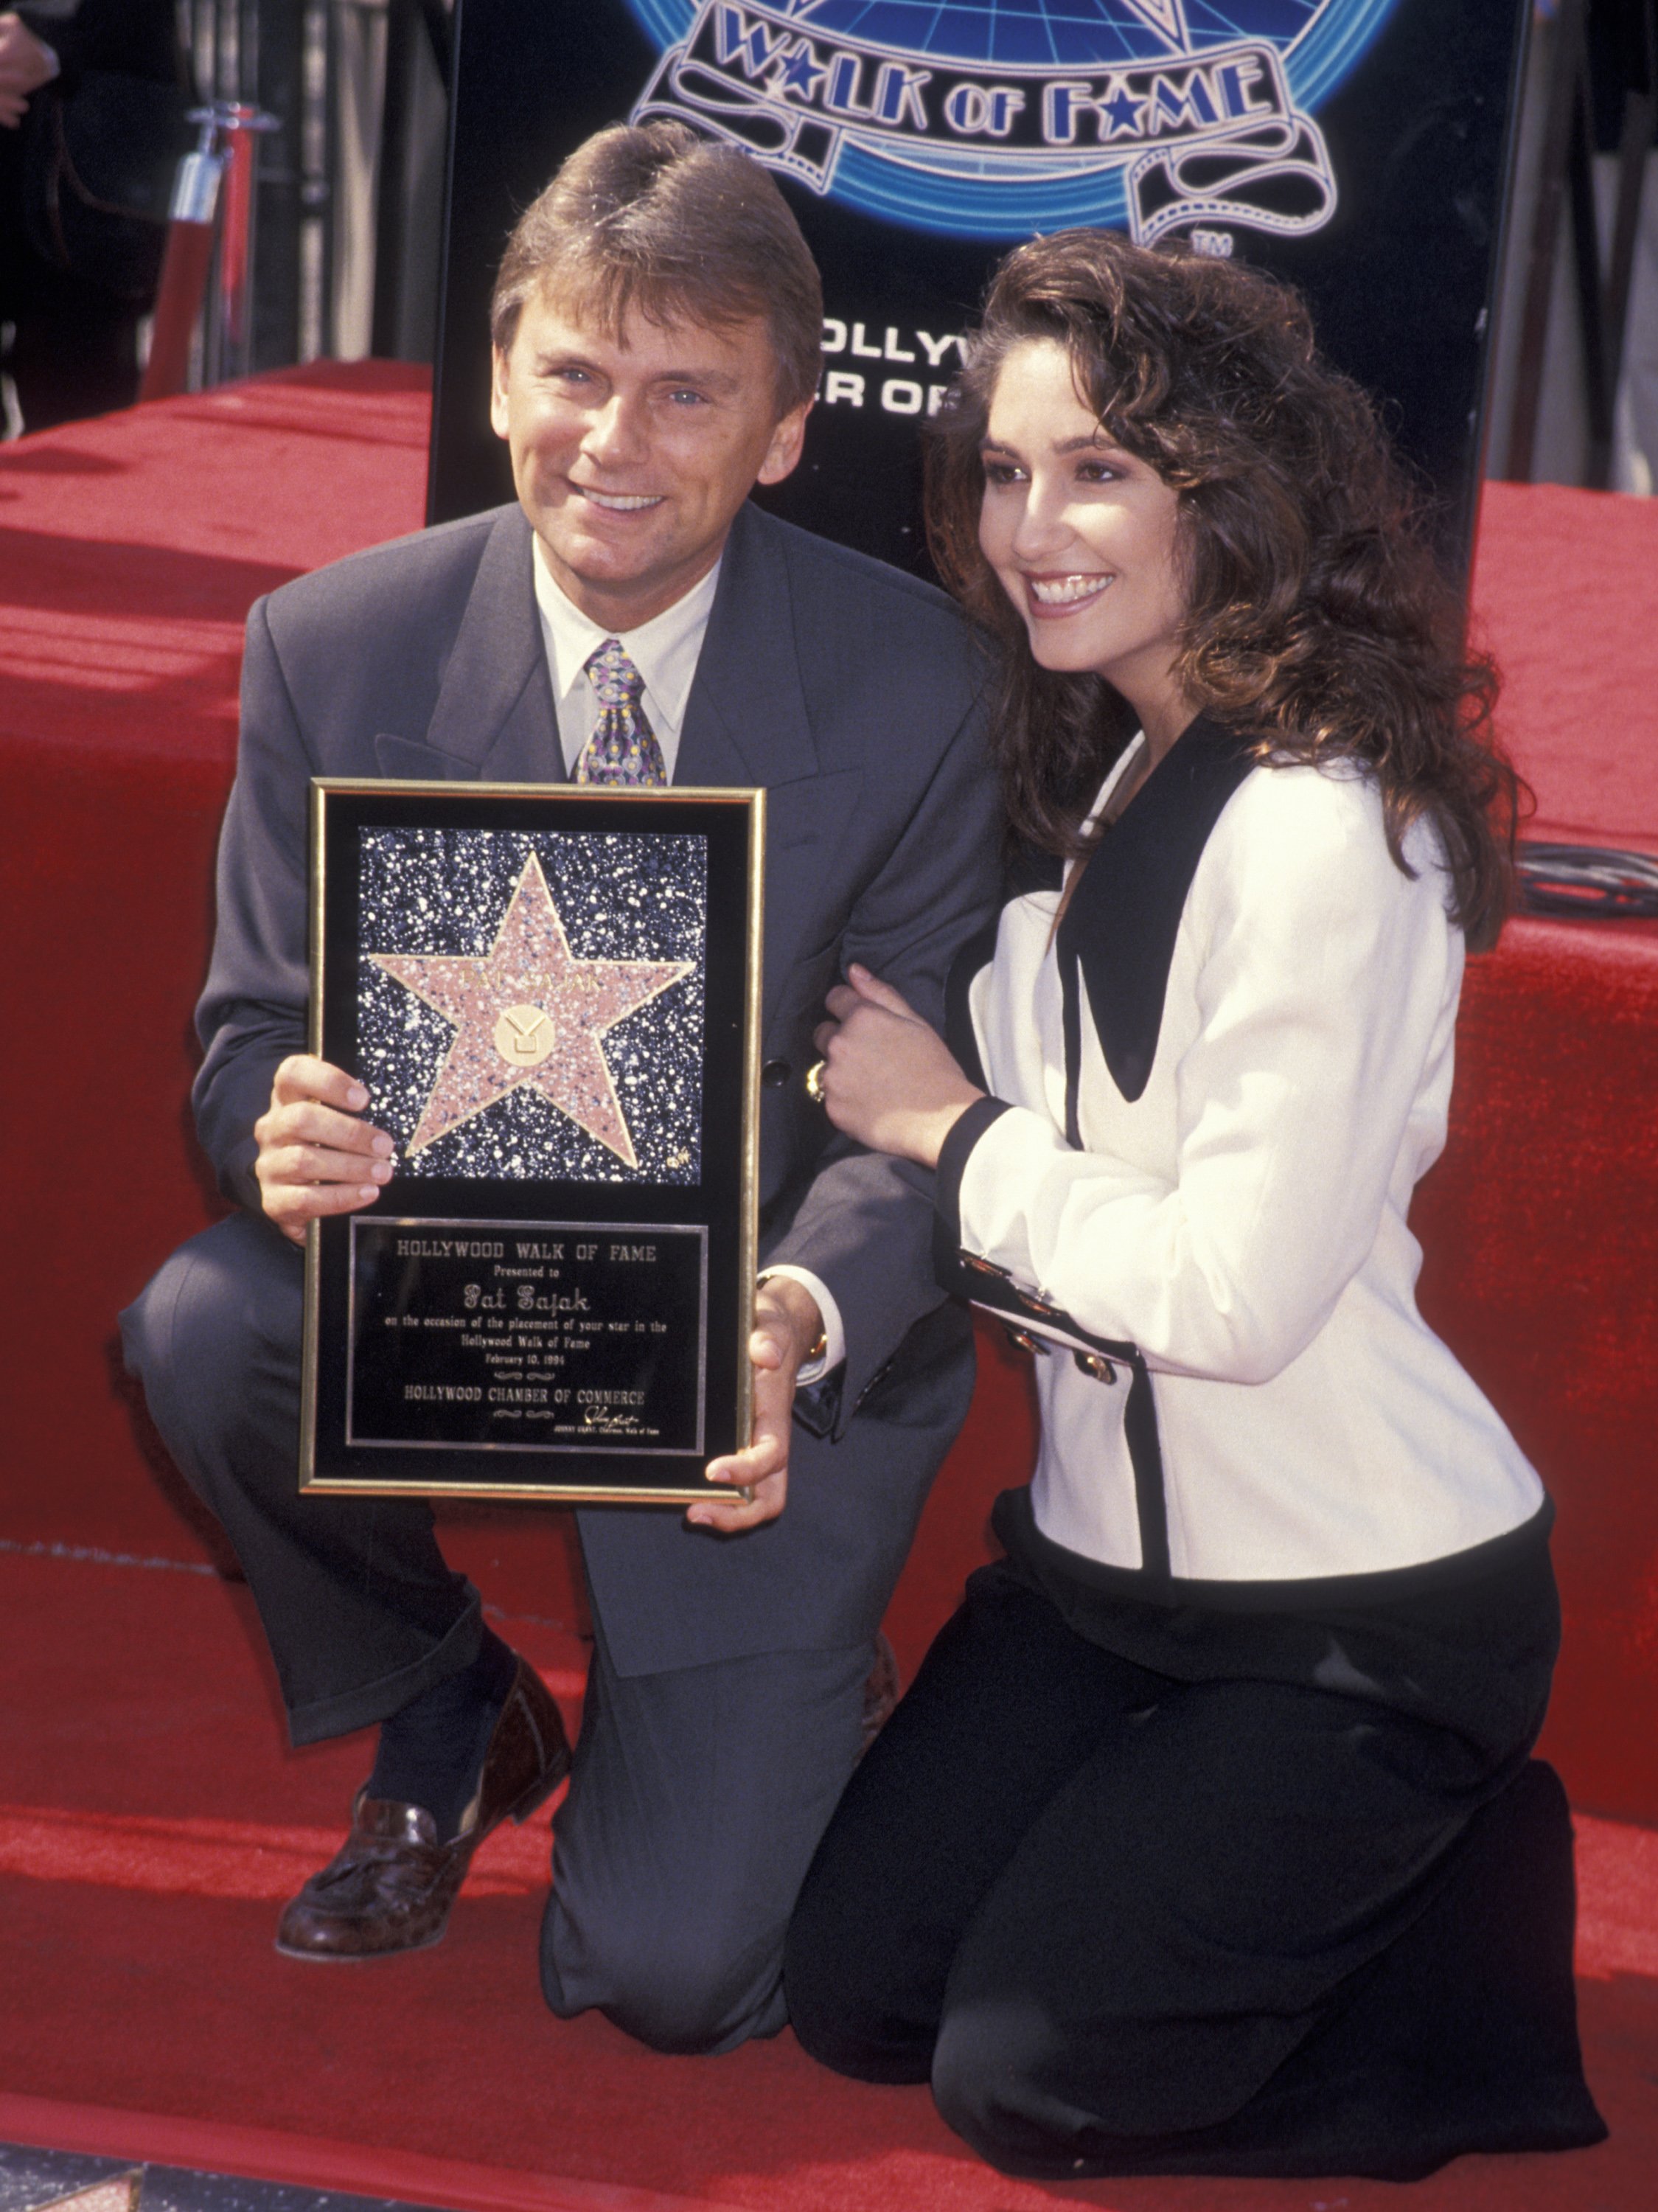 Pat Sajak and Lesly Brown at the "Pat Sajak Receives Walk of Fame Star" on February 10, 1994, at the Hollywood Walk of Fame in Hollywood, California. | Source: Getty Images